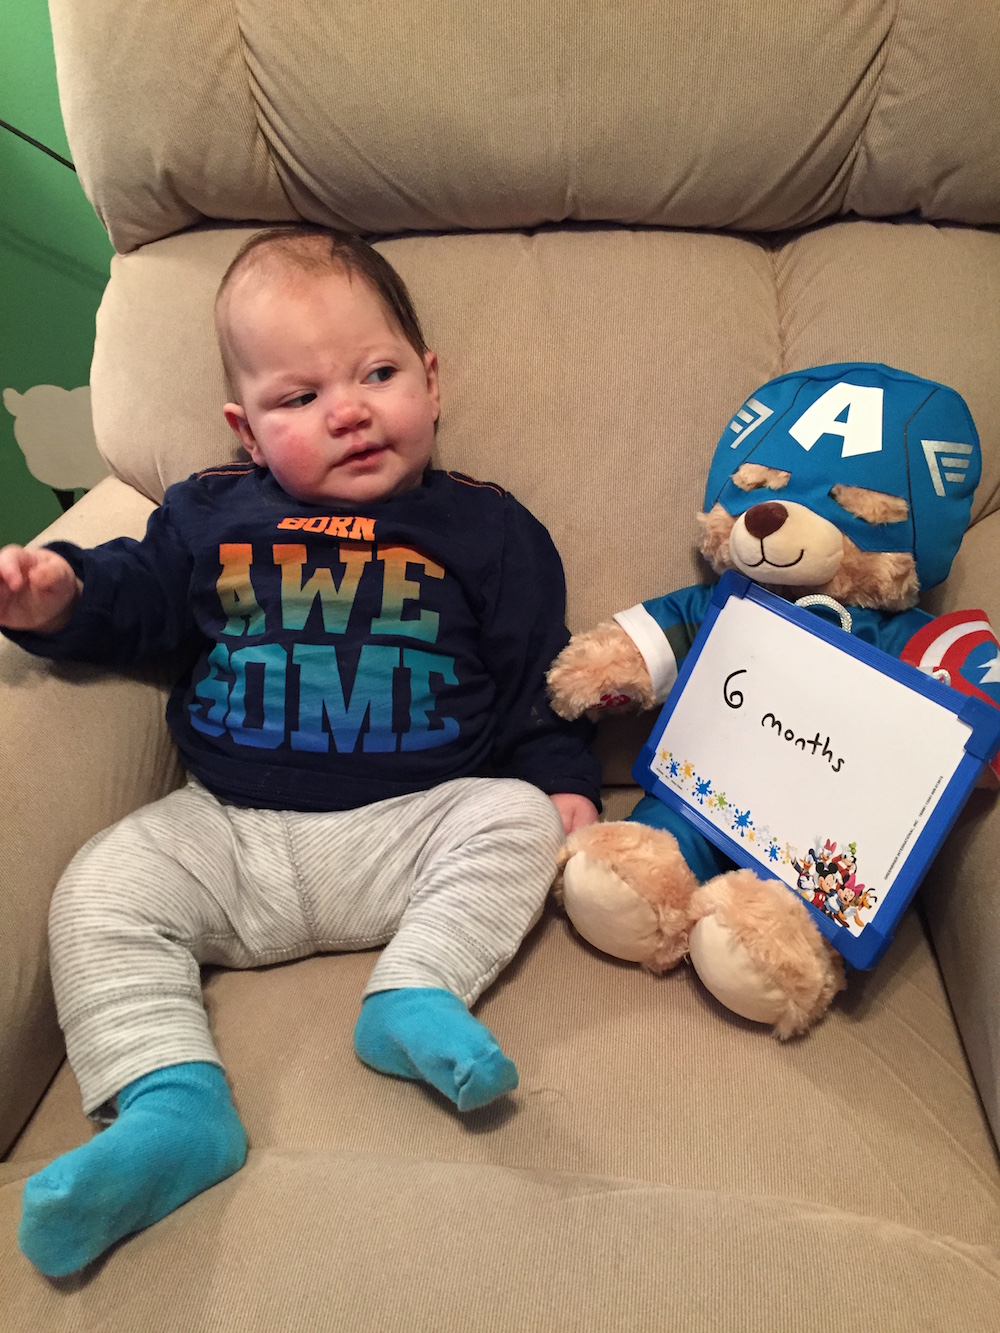 baby next to teddy bear holding "6 months" sign